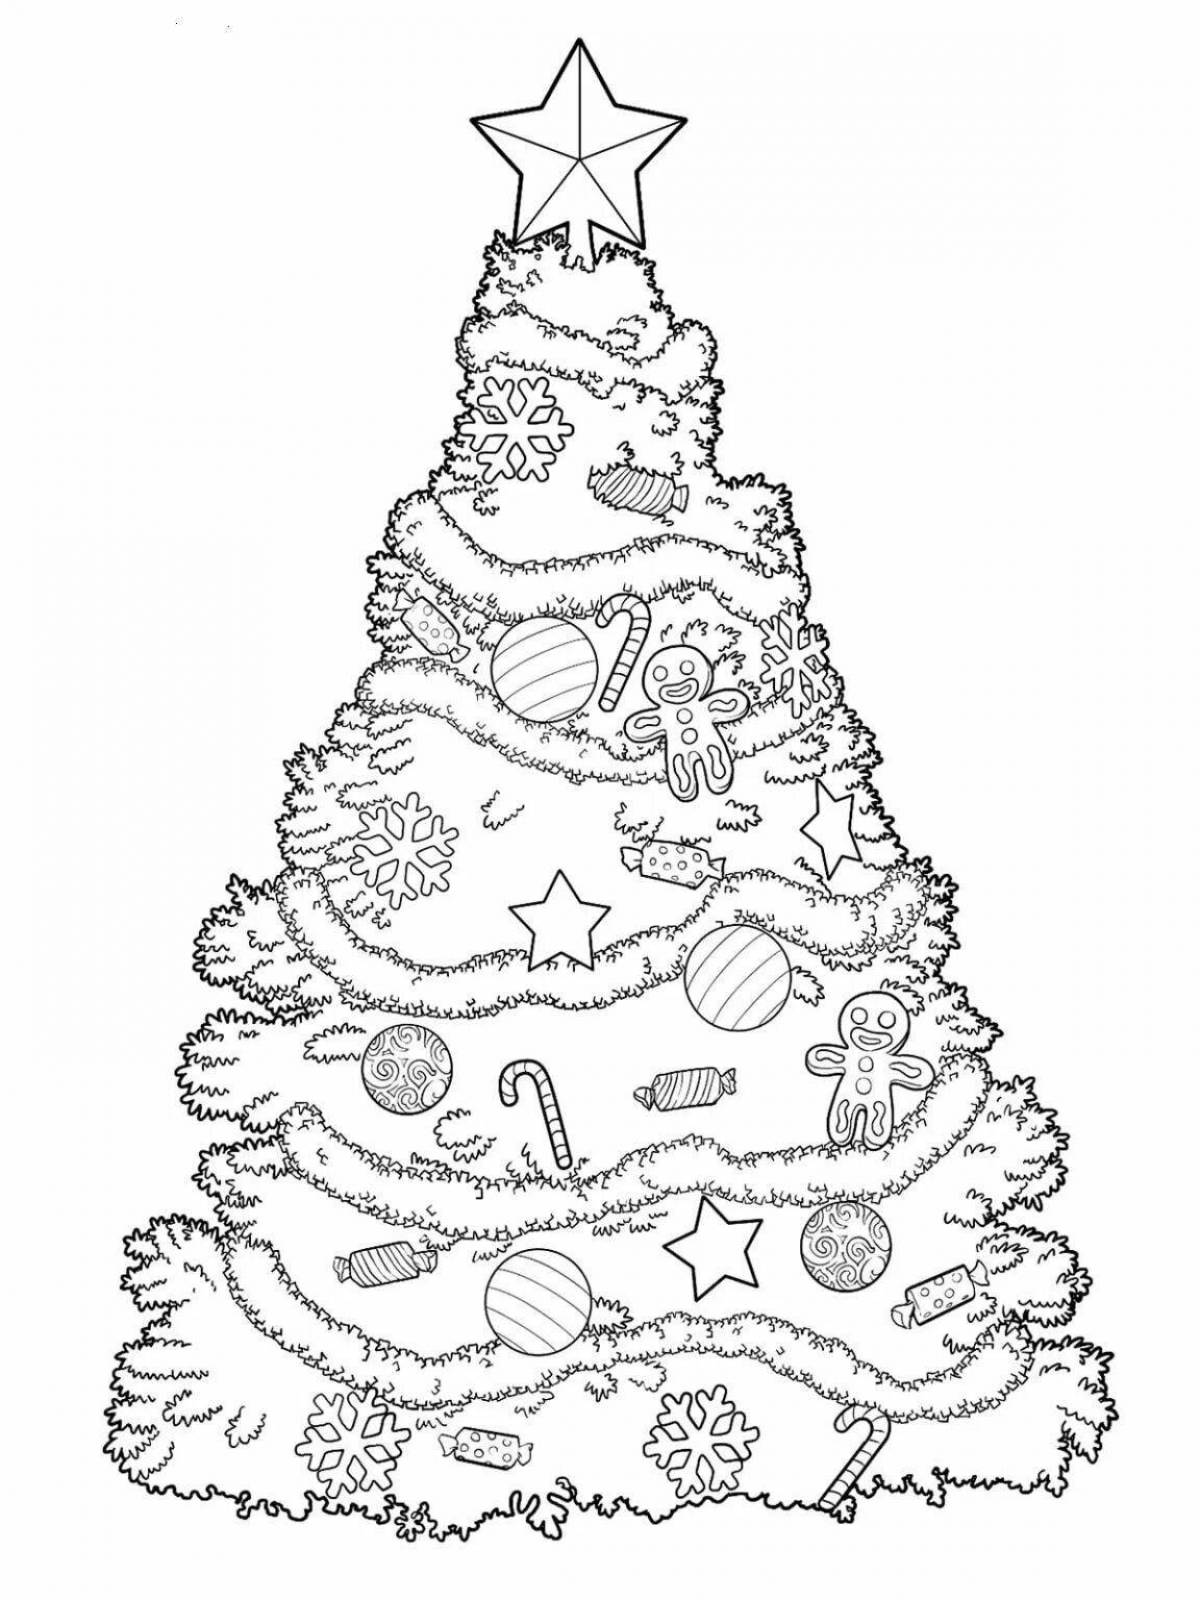 Large tree coloring book for kids